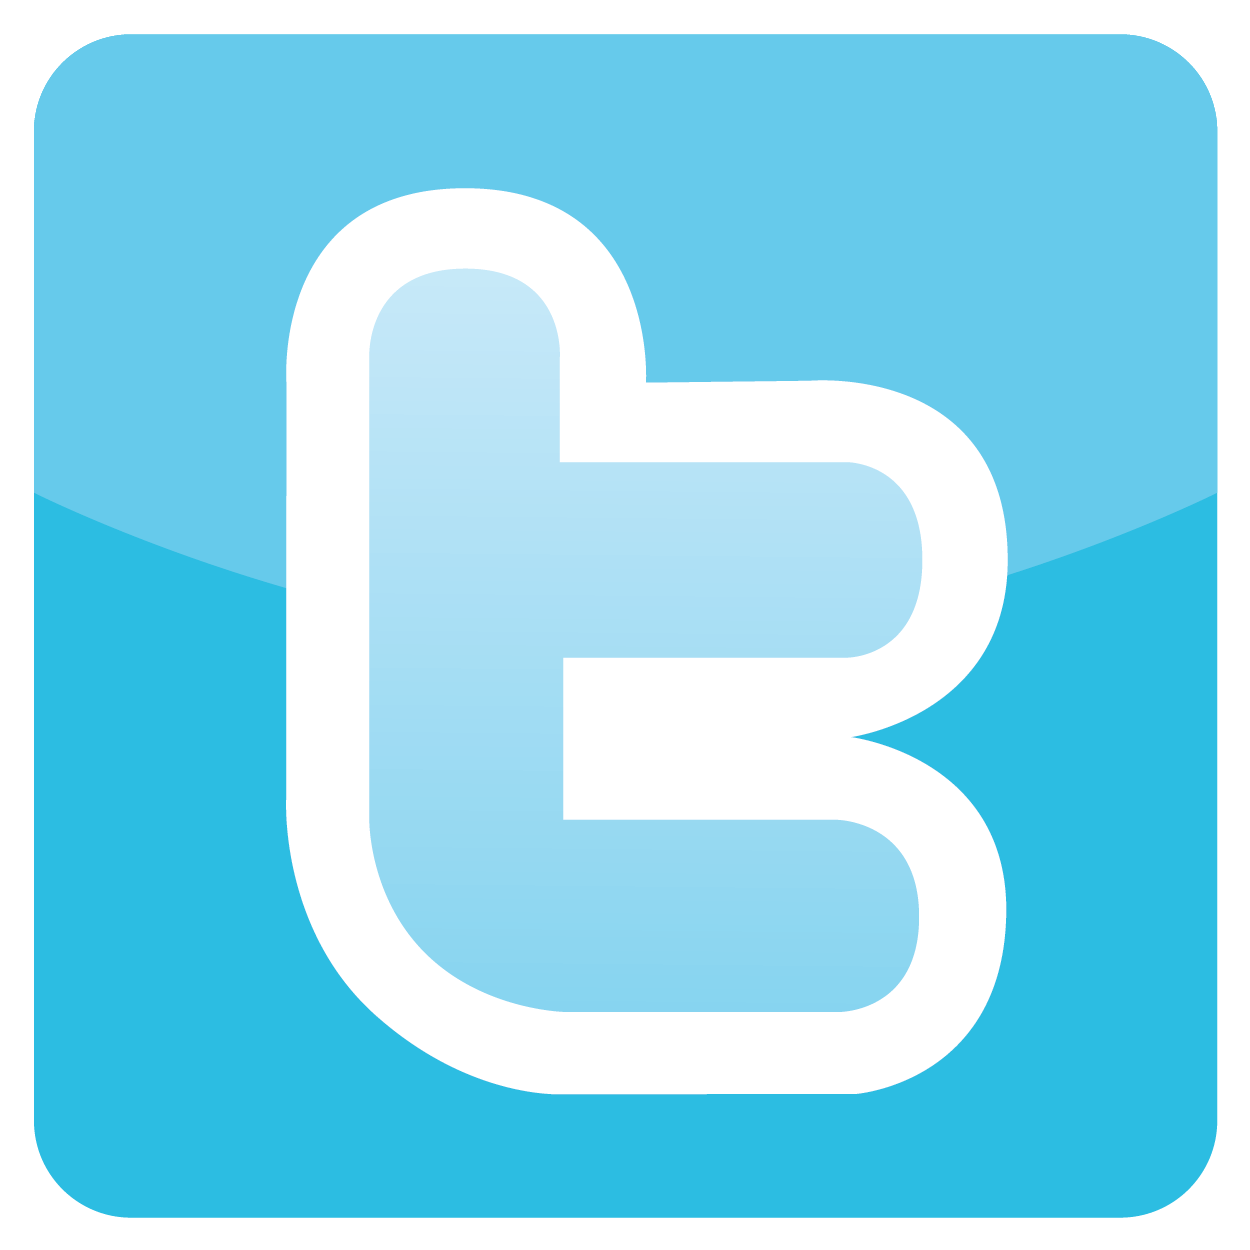 the old twitter logo linking to the site owner's twitter page